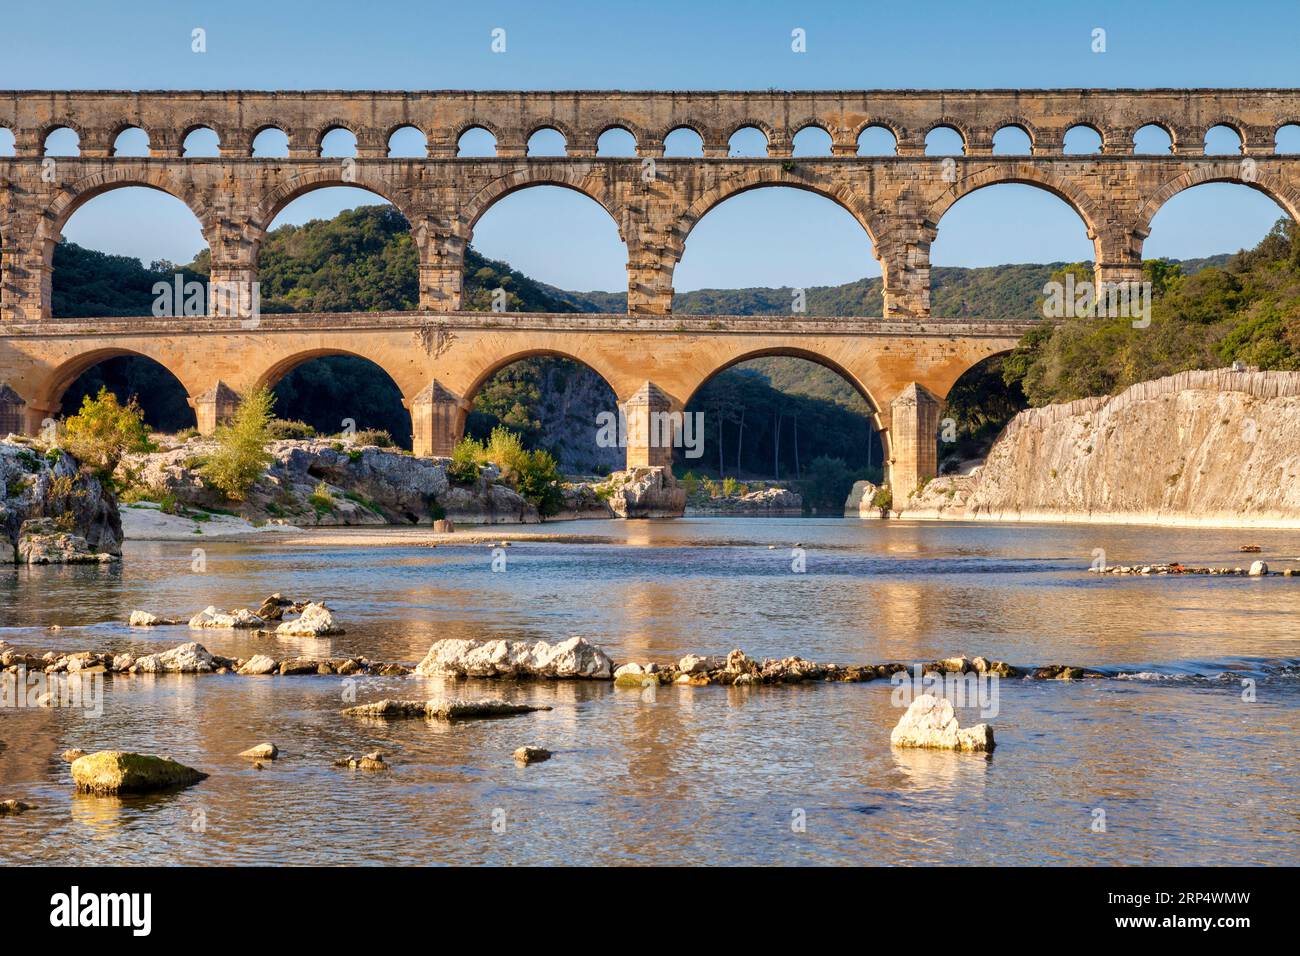 Pont du Gard Roman Aqueduct, Languedoc-Roussillon, France, in early autumn. This was built by the Romans in the first century AD to carry water from... Stock Photo